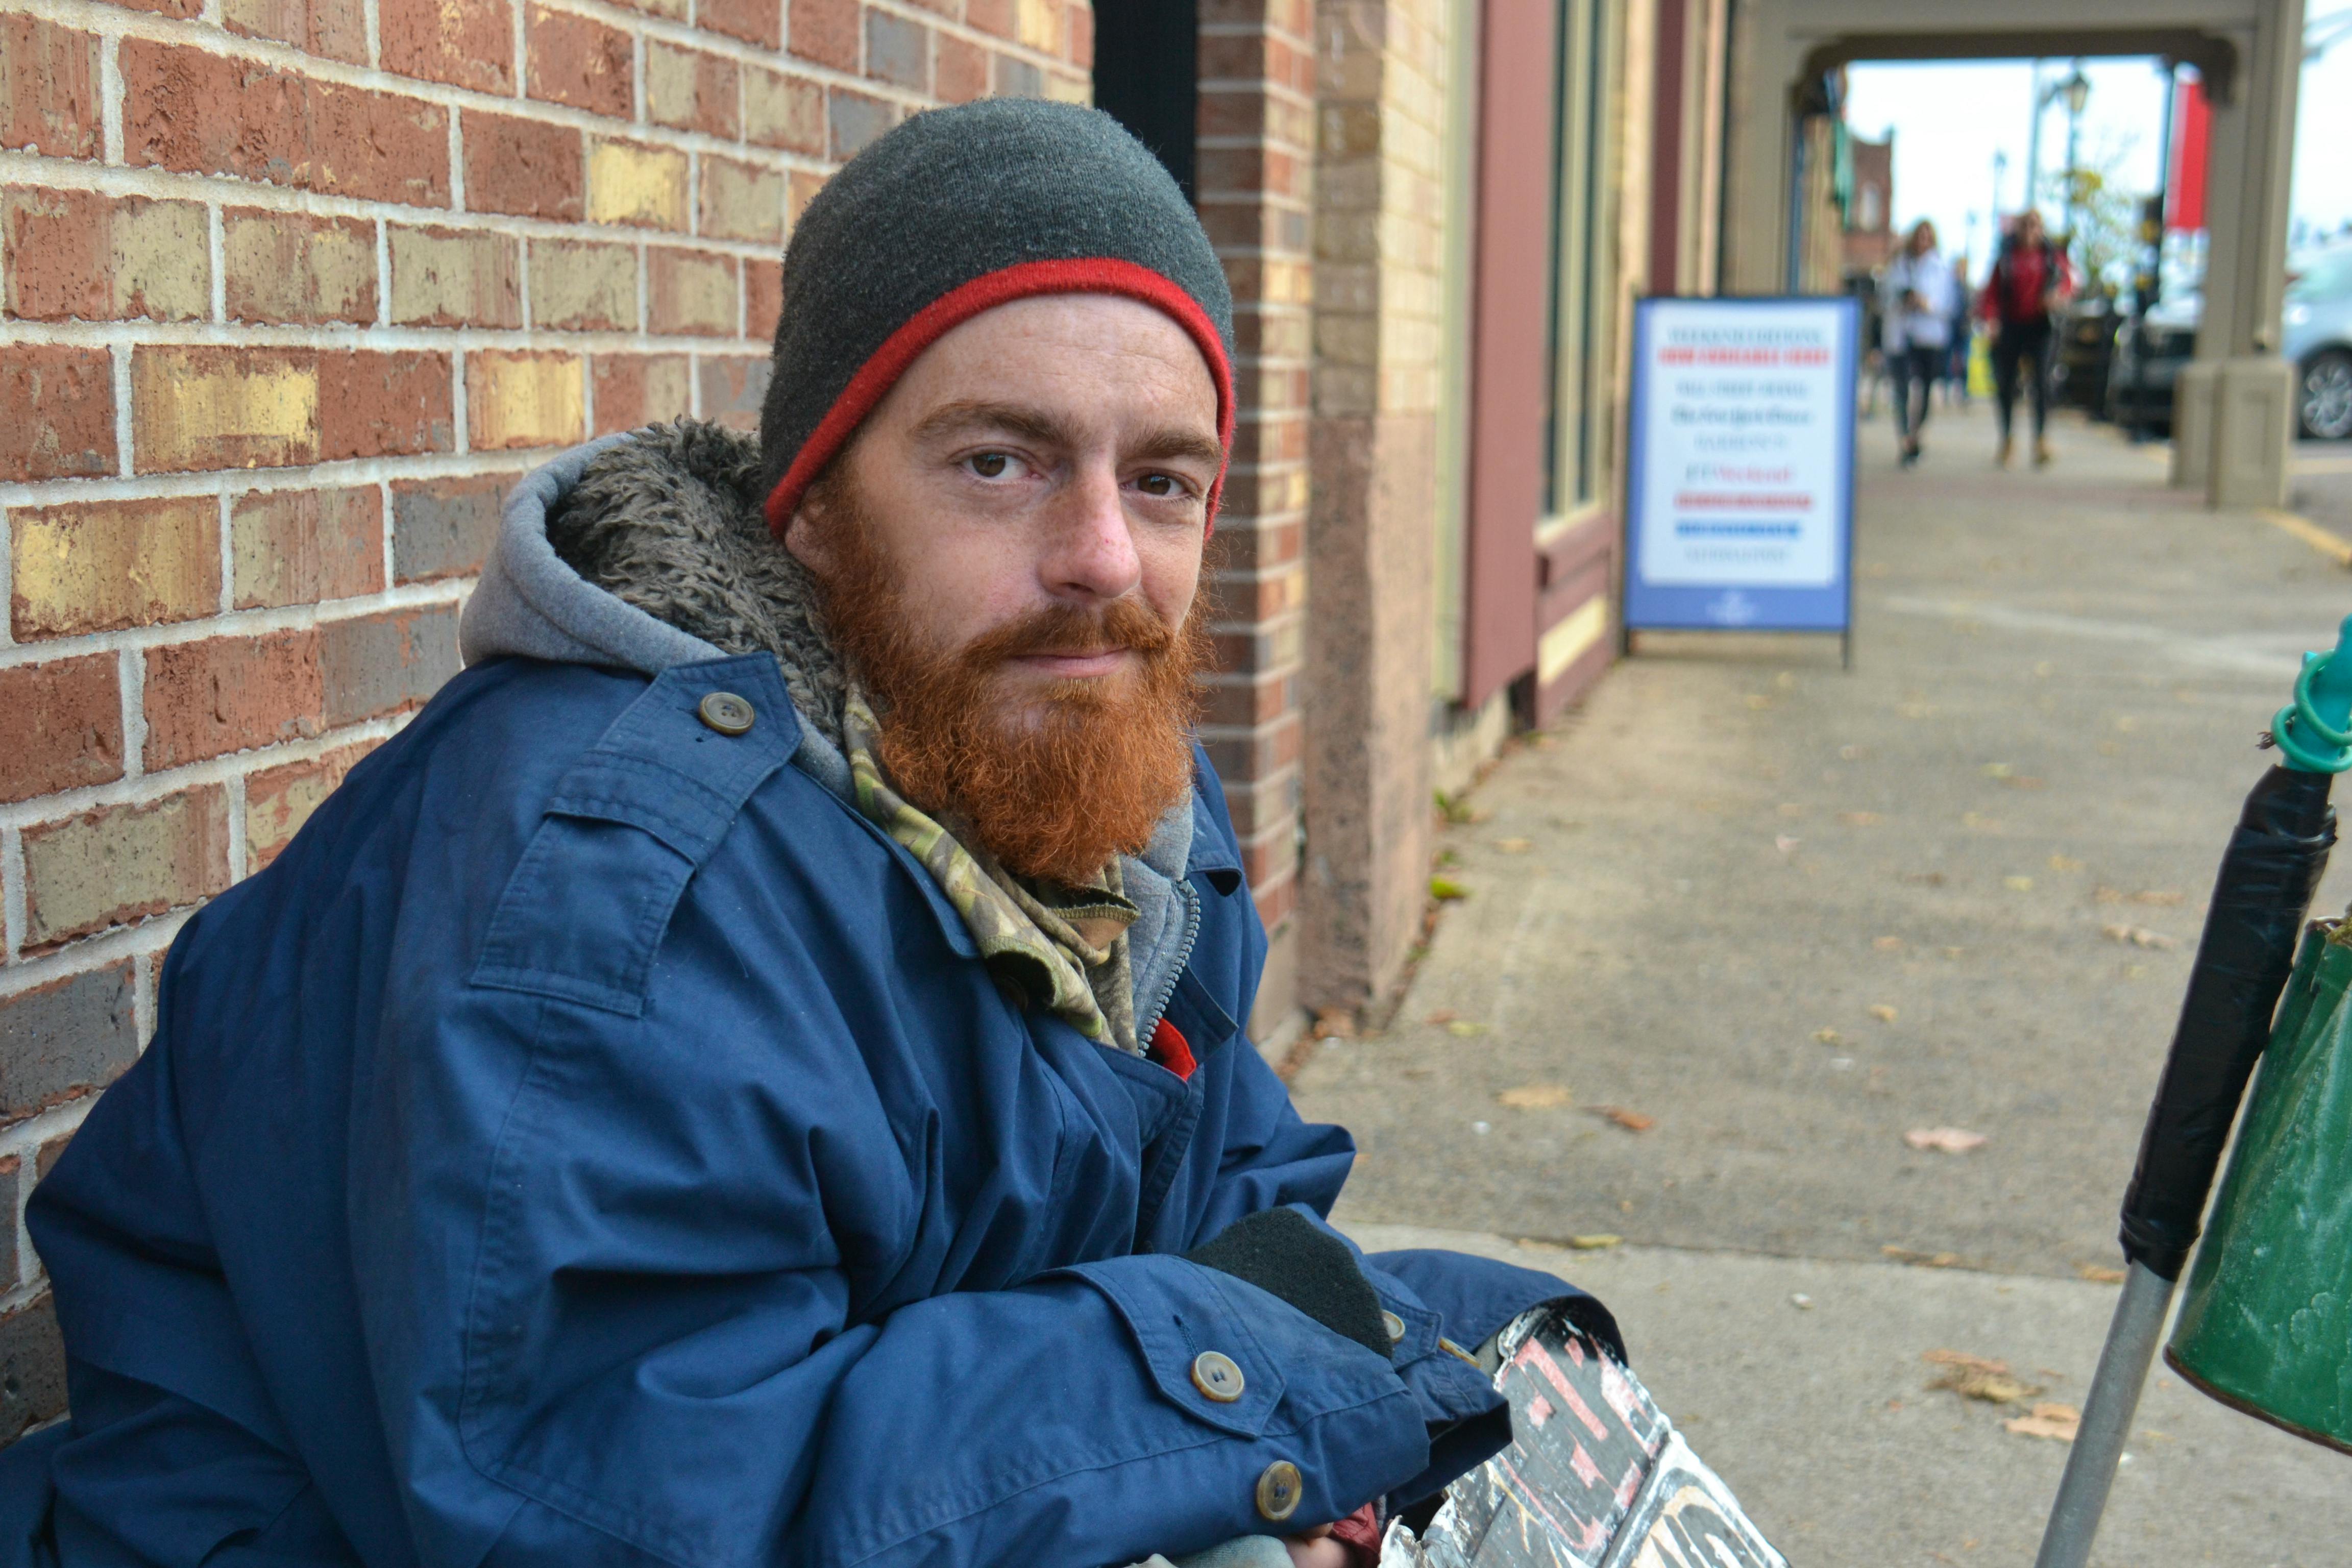 Homelessness is on the rise in P.E.I.: 'We've got to look out for each  other